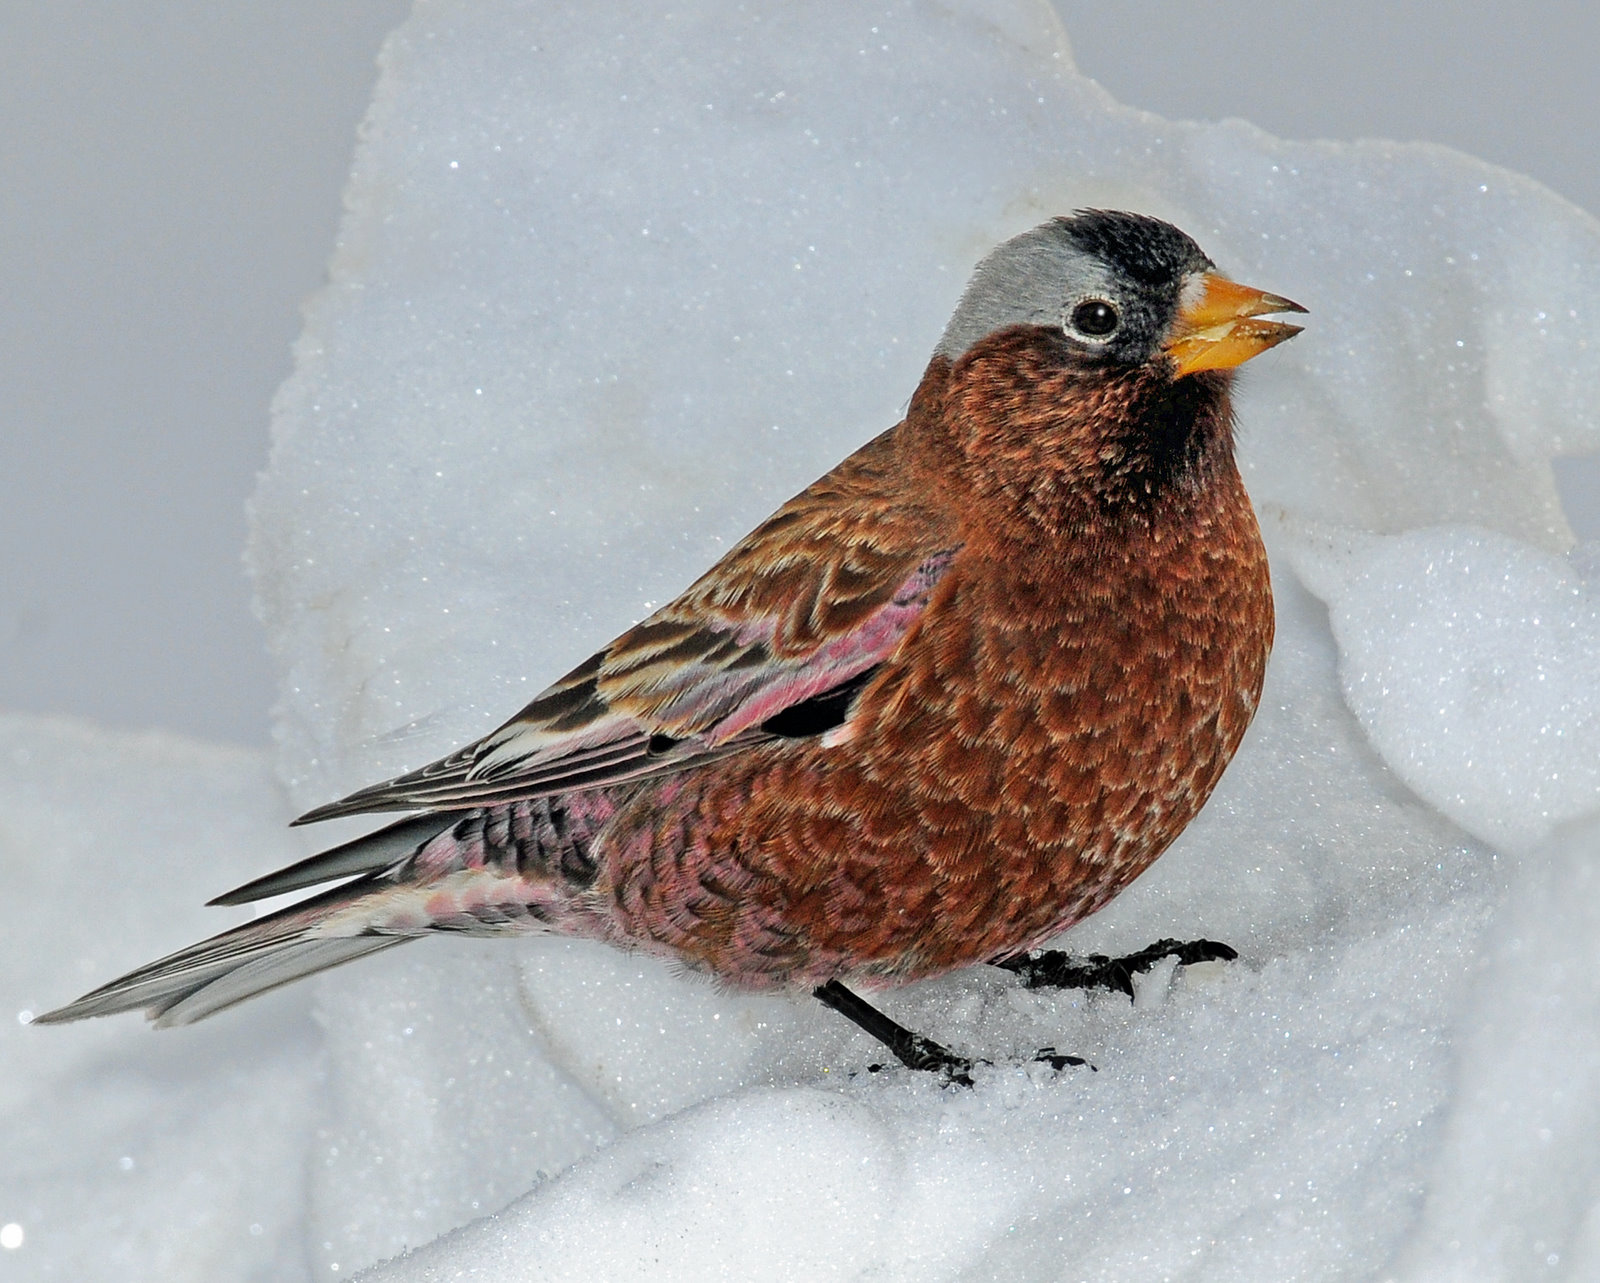 Gray-crowned Rosy Finch